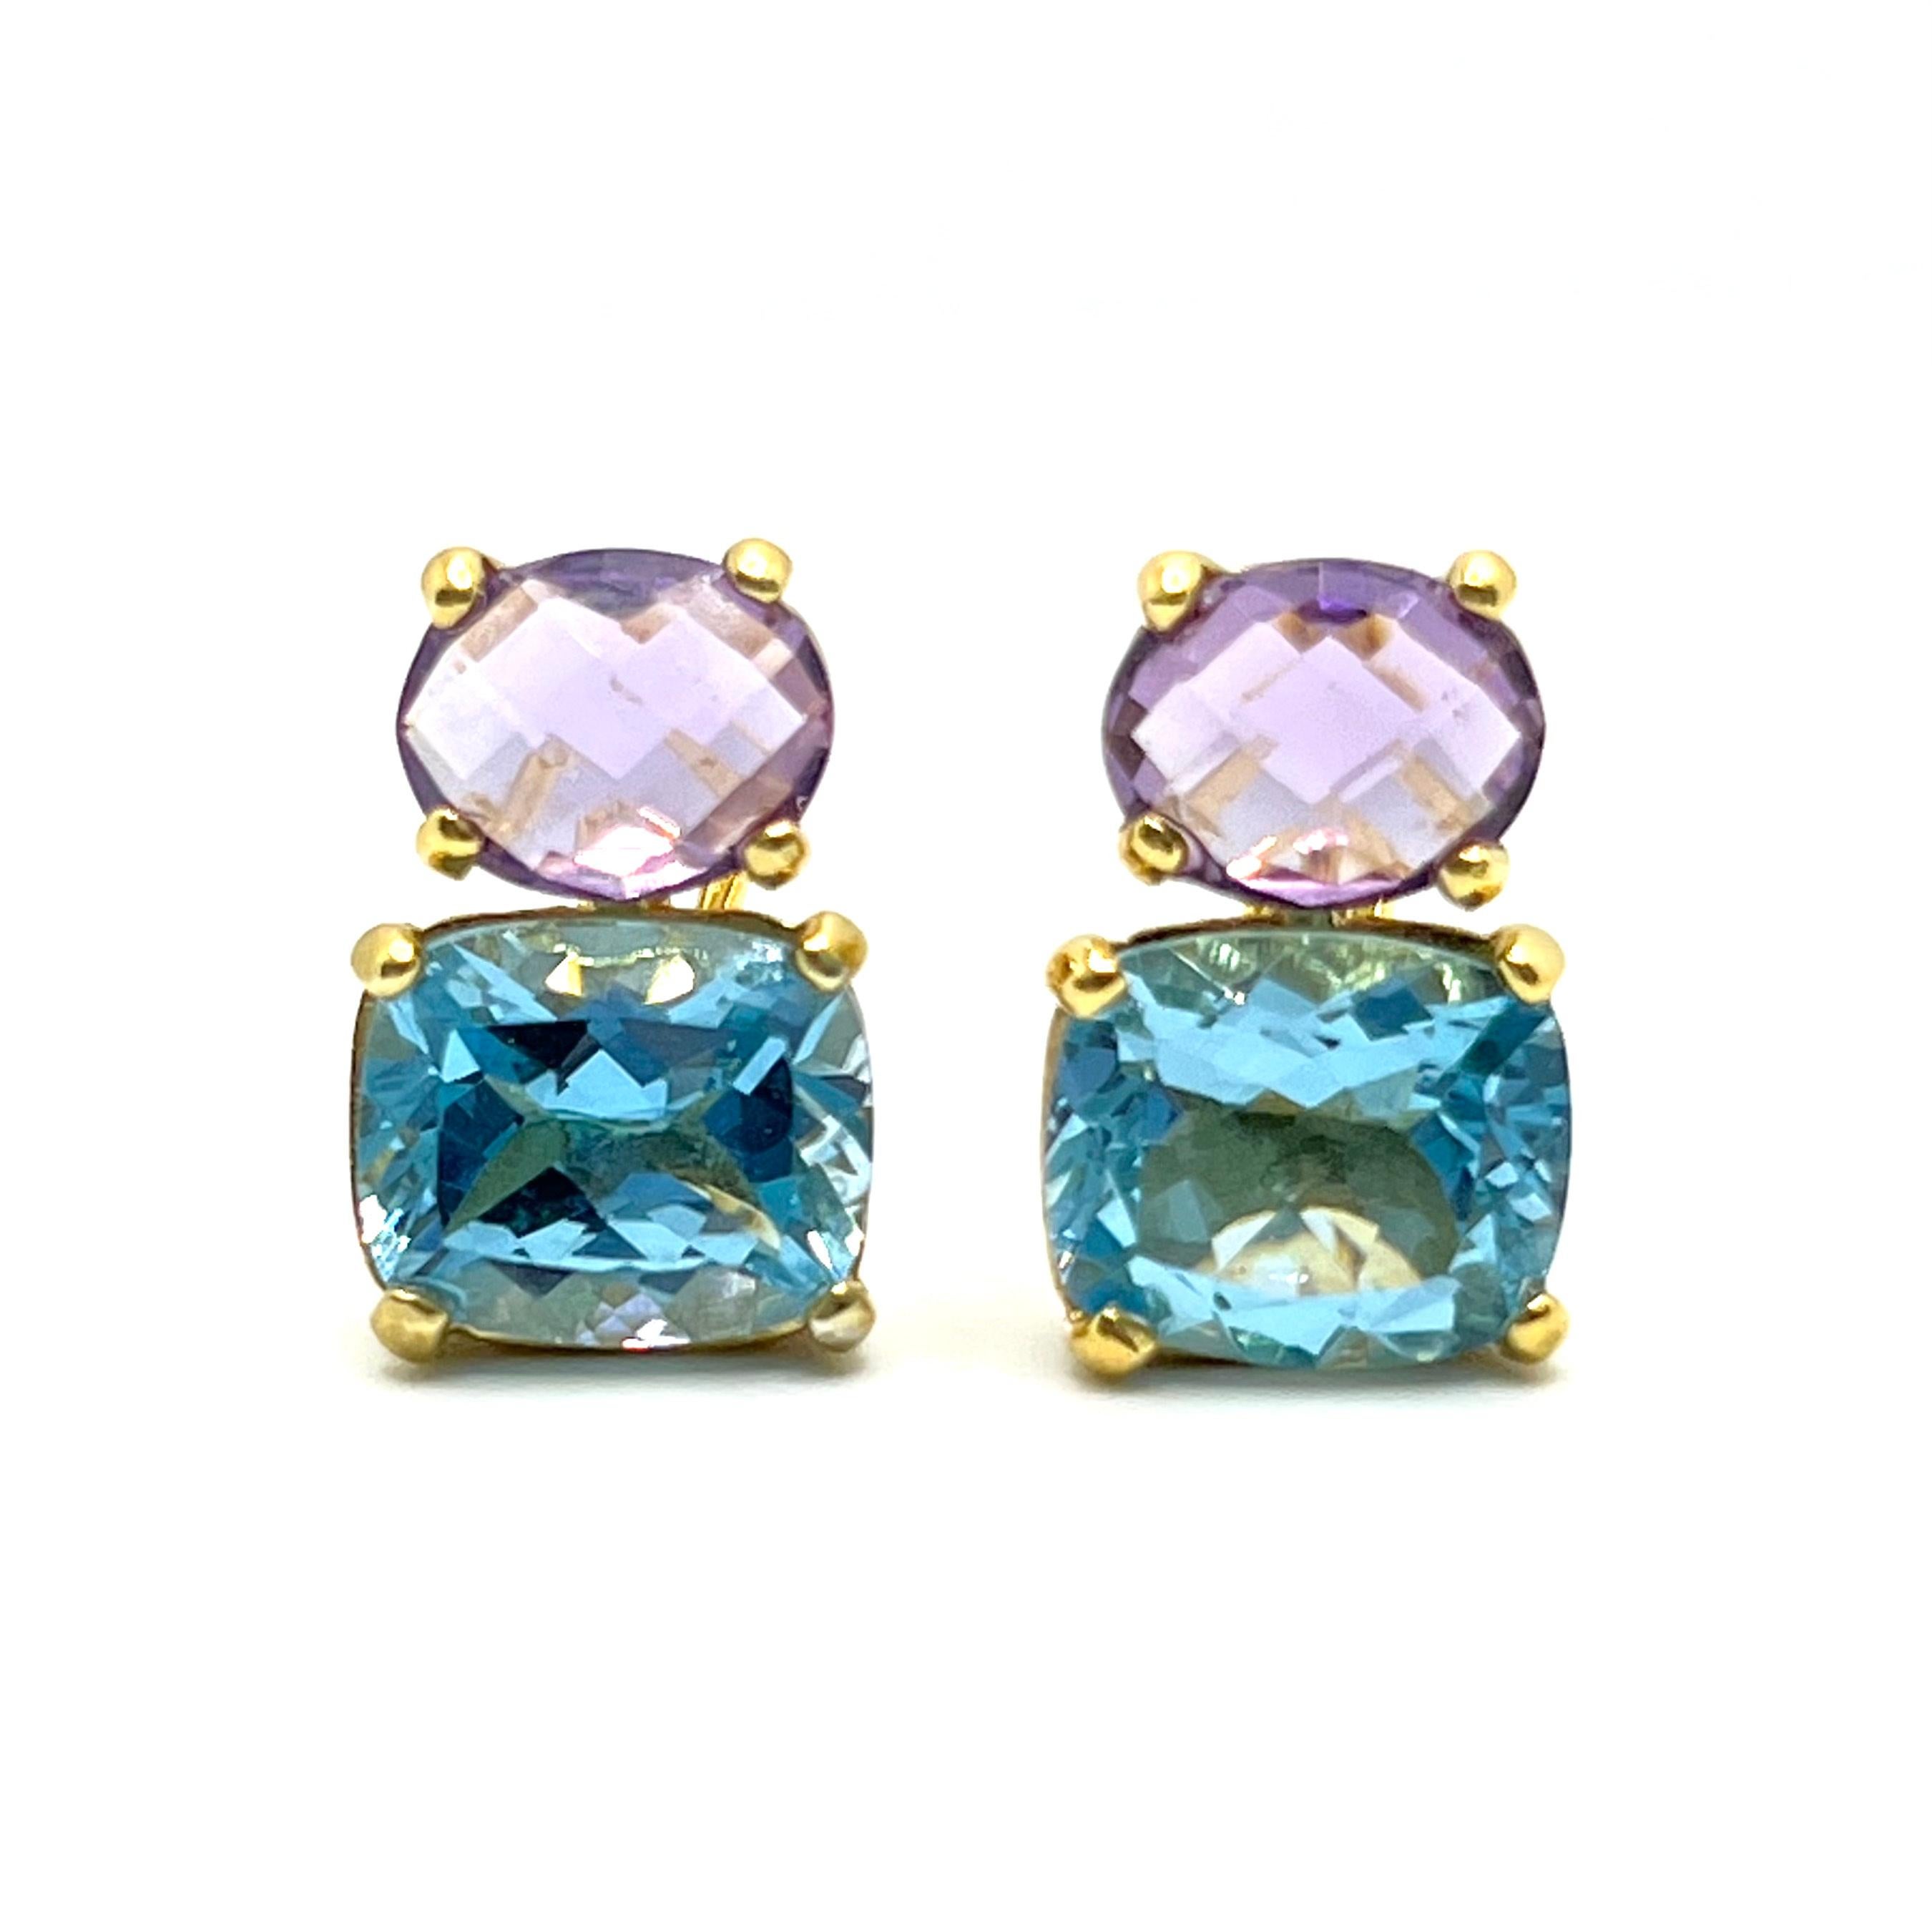 These stunning pair of earrings features a pair of genuine oval briolette-cut amethyst with cushion-cut sky blue topaz, handset in 18k yellow gold vermeil over sterling silver. The double blue combination creates stunning two-tone blue-purple hue!